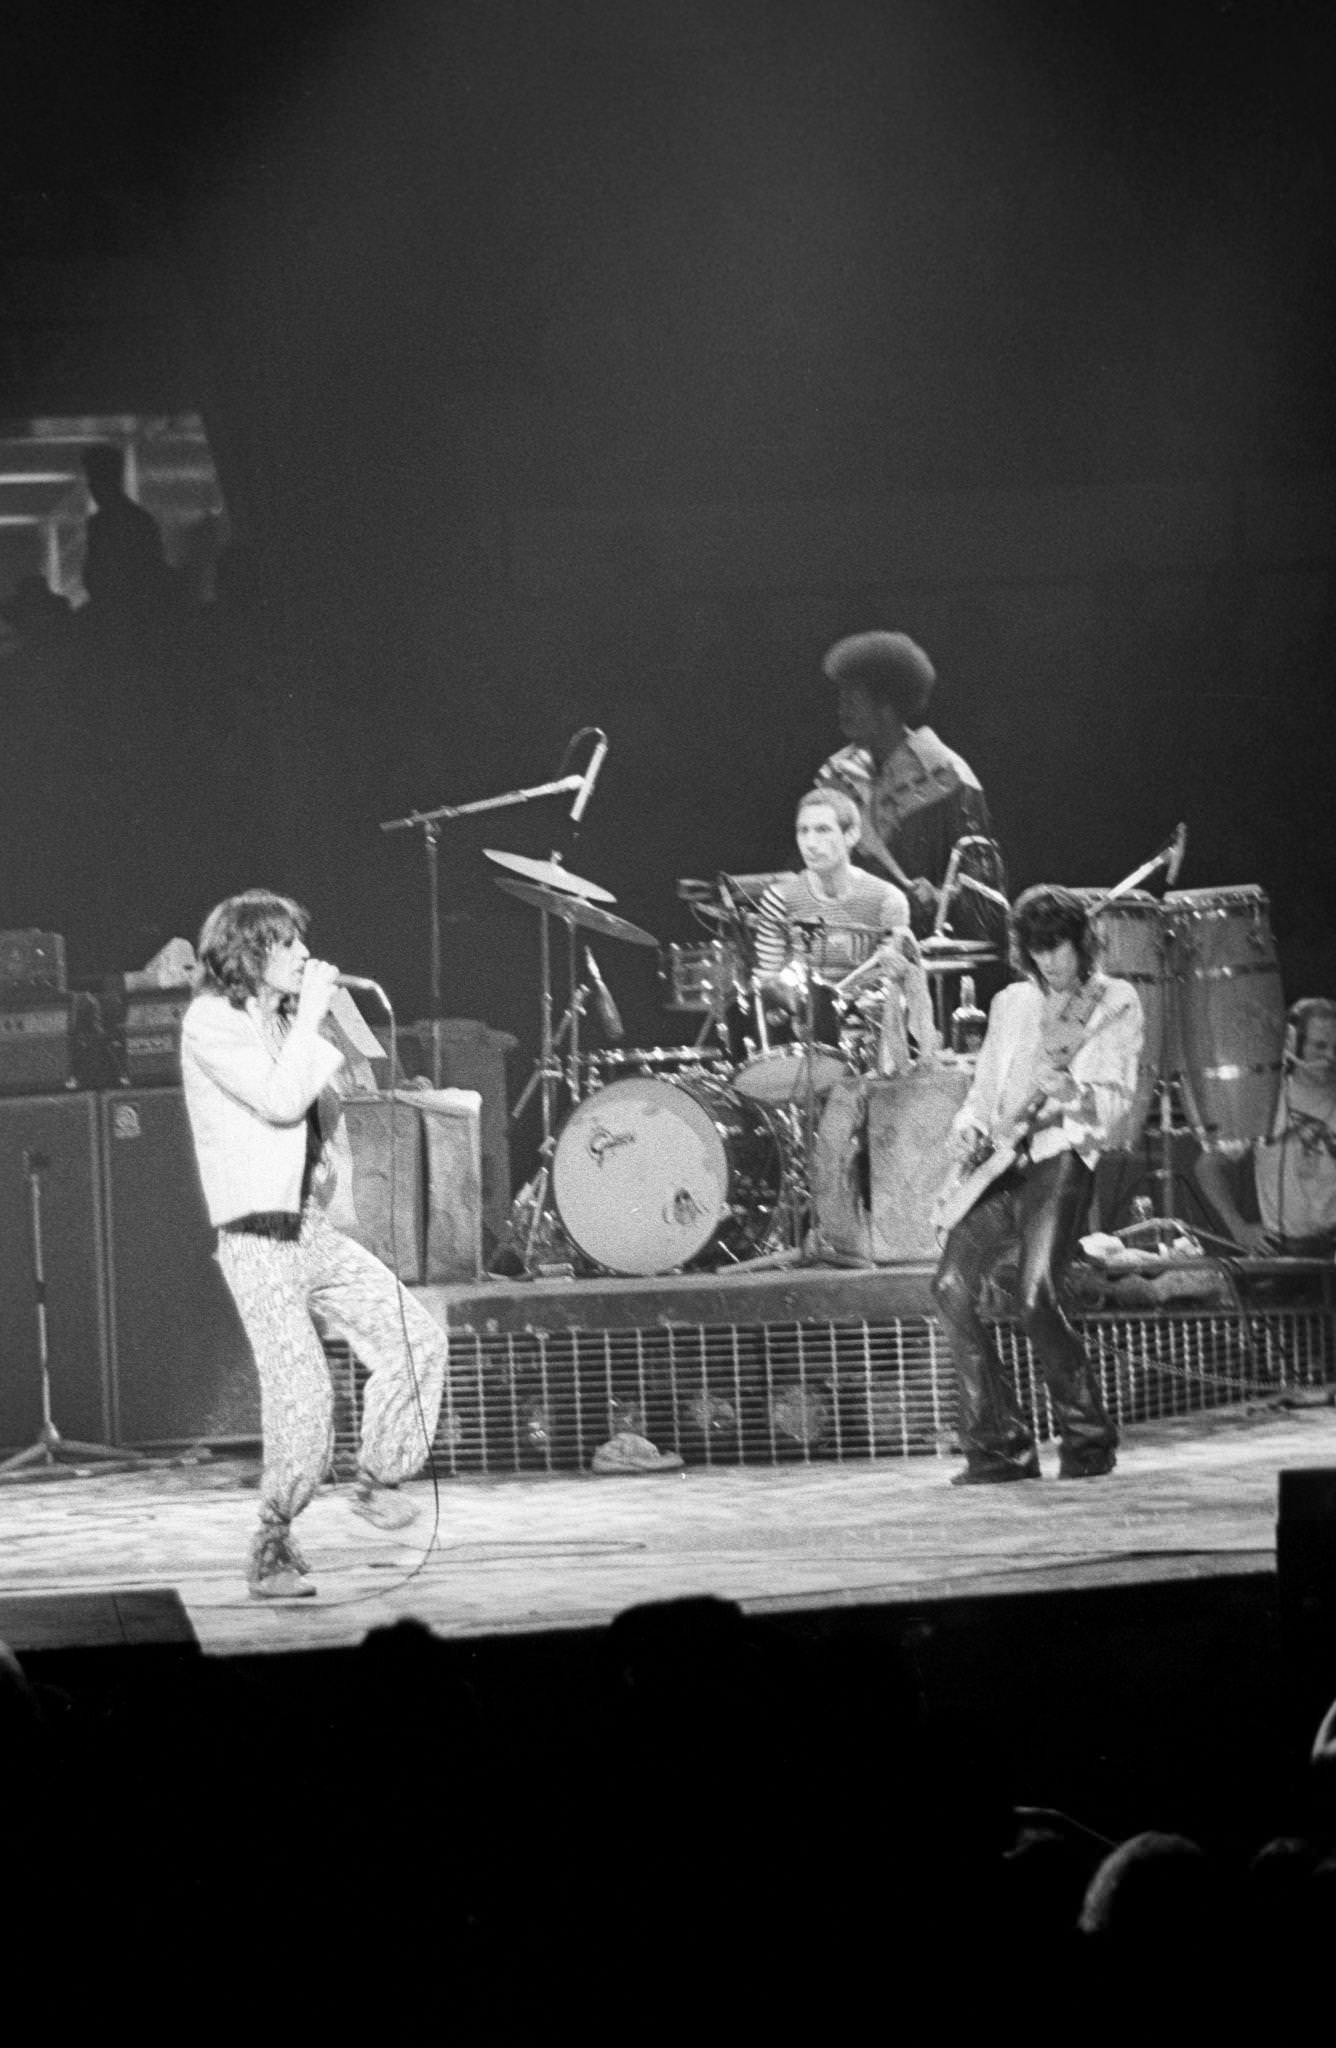 Mick Jagger, Keith Richards, and Charlie Watts perform with percussionist Ollie Brown at Madison Square Garden during the band's "Tour of America '75" on June 25, 1975, in New York, New York.